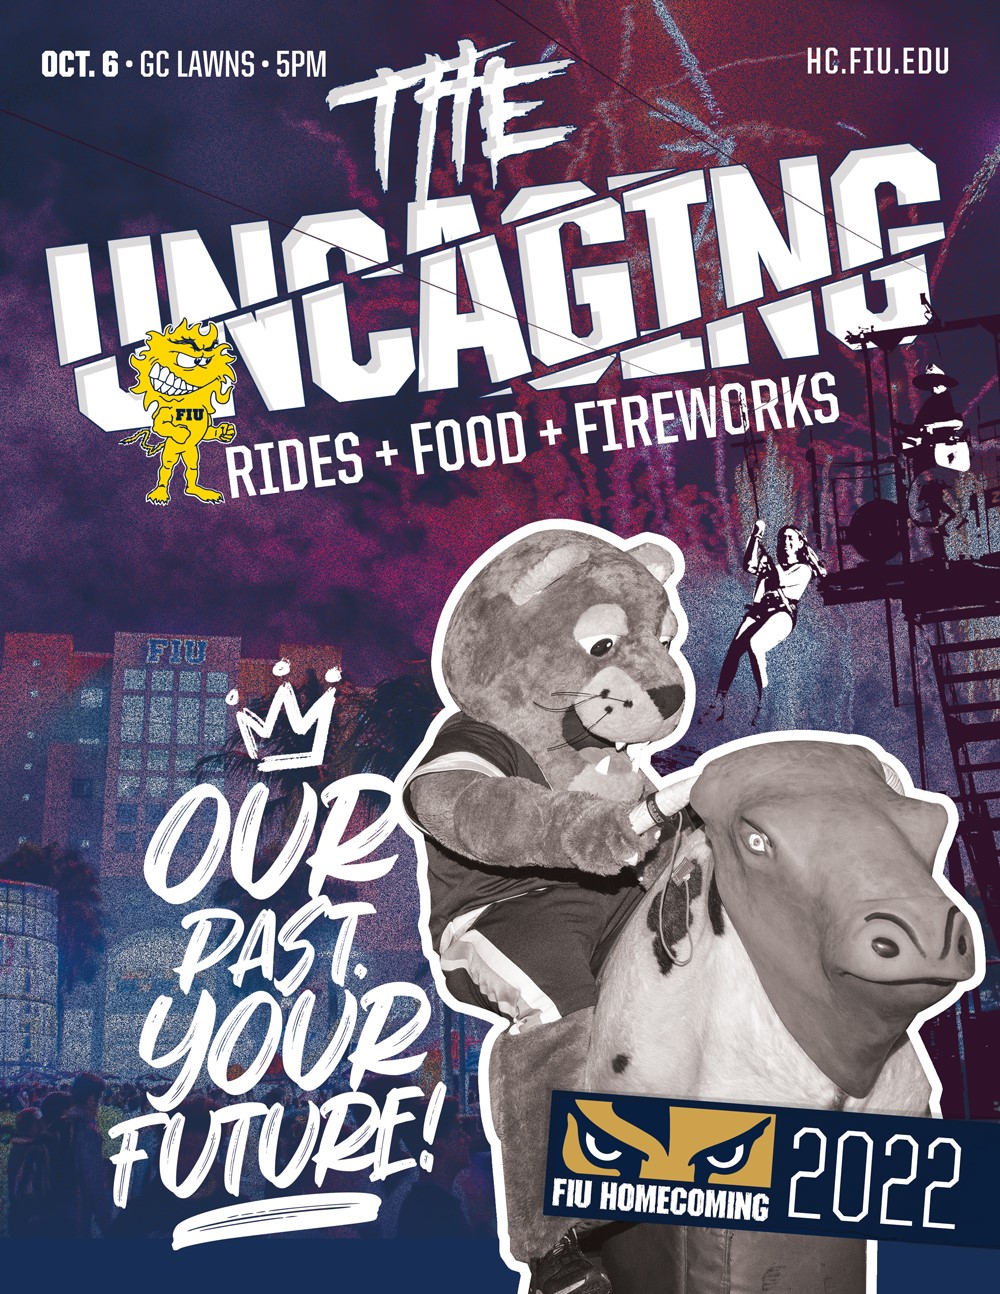 Join us for the ultimate Homecoming spirit event, The Uncaging! We are pleased to invite you to a special reception at The Uncaging, where you'll have the chance to mingle with members of the President's Council, the FIU Alumni Association Board, and fellow Alumni. Guests will enjoy complimentary light bites and drinks. Bring the whole family!